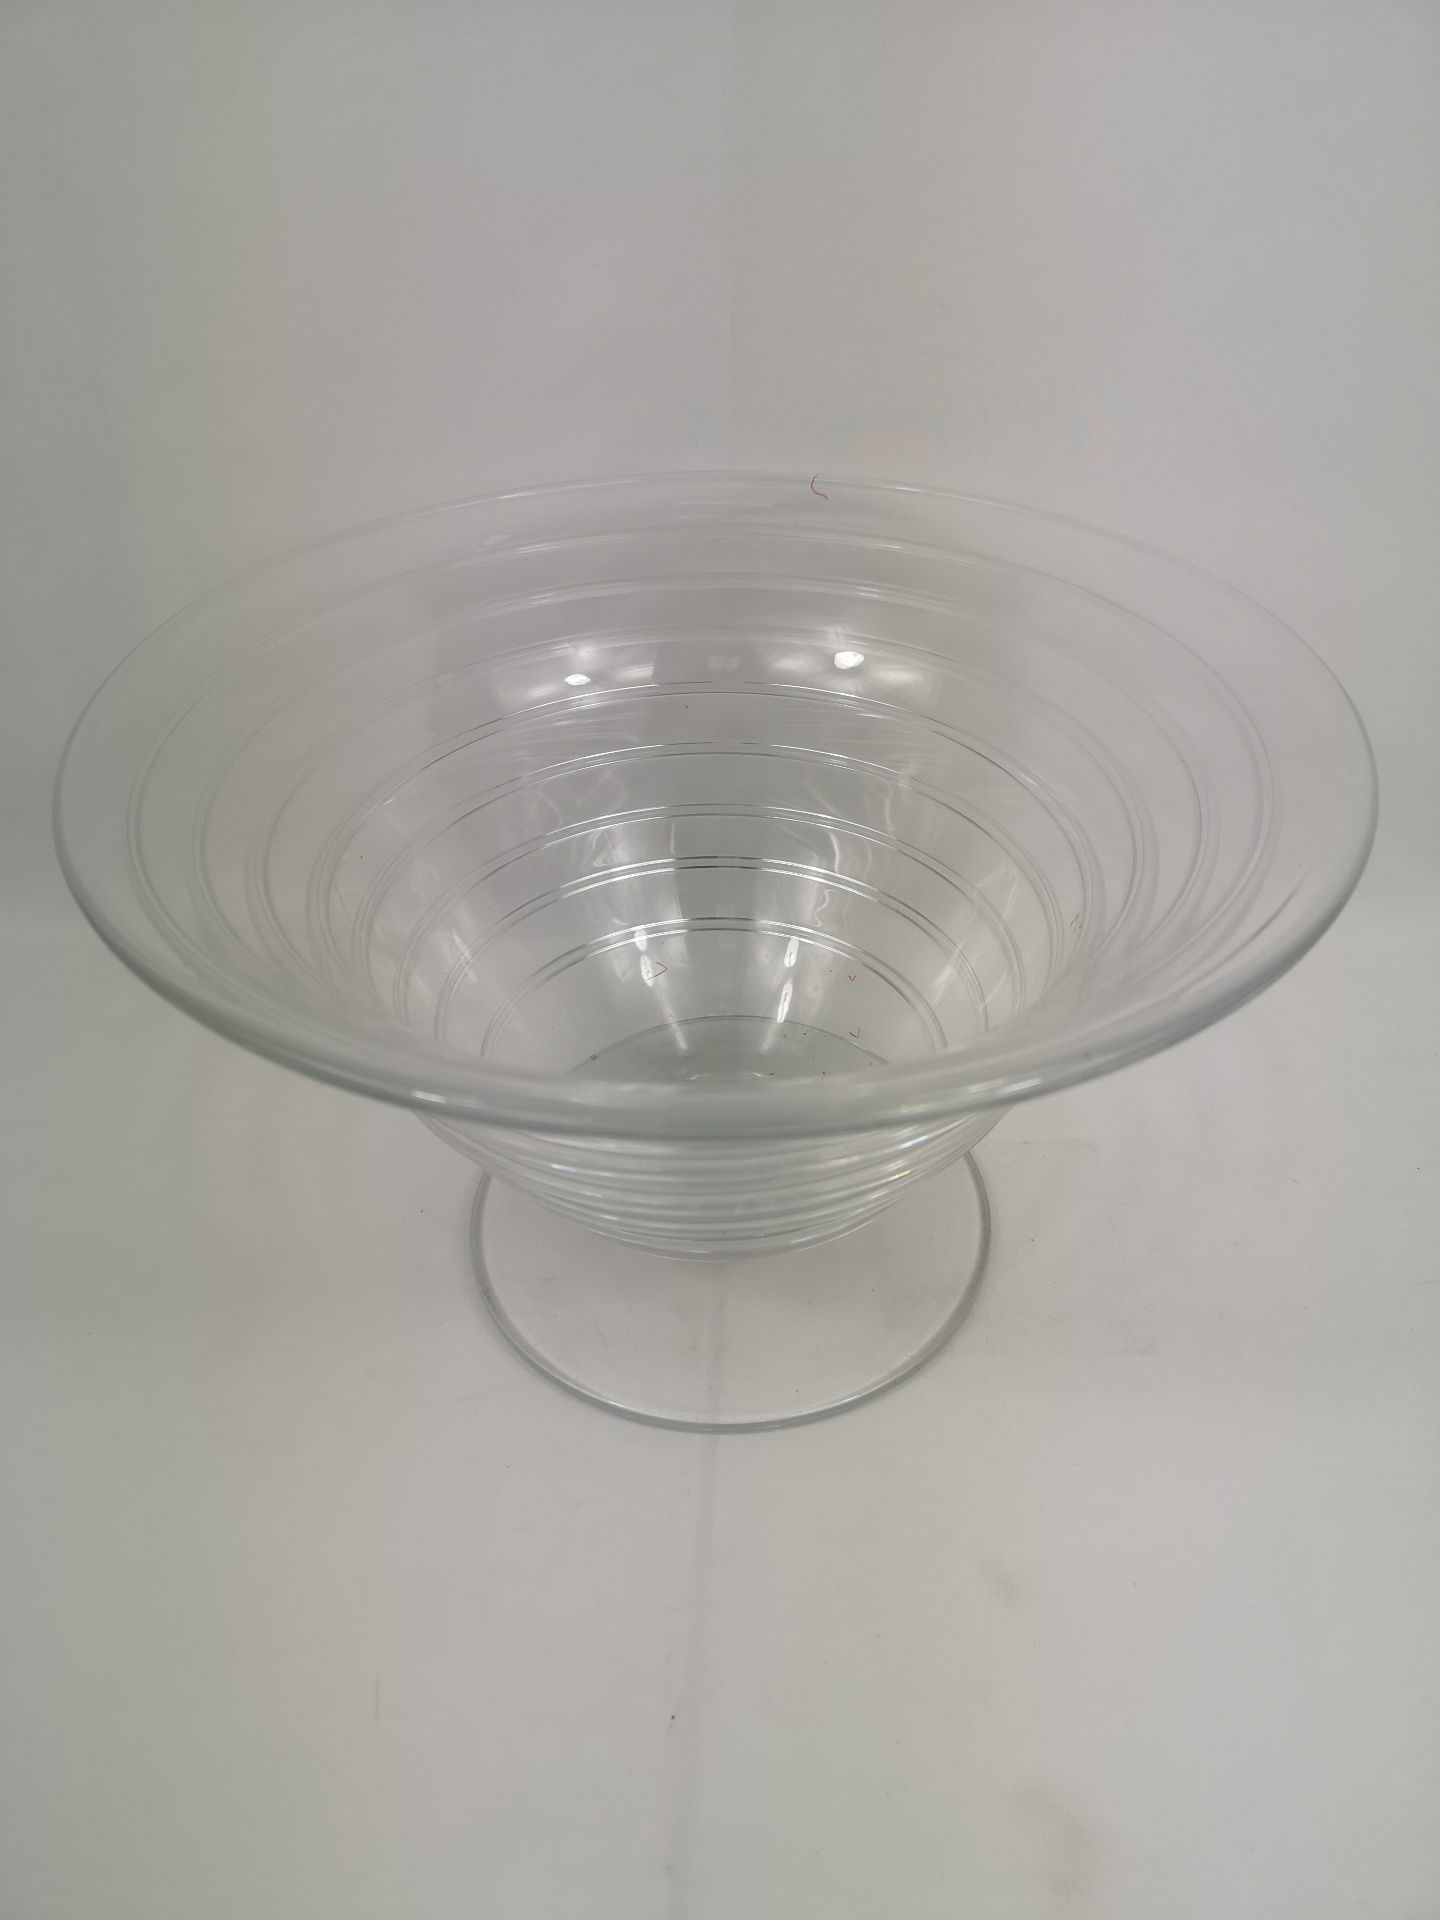 LSA glass bowl together with an art glass sculpture - Image 6 of 6